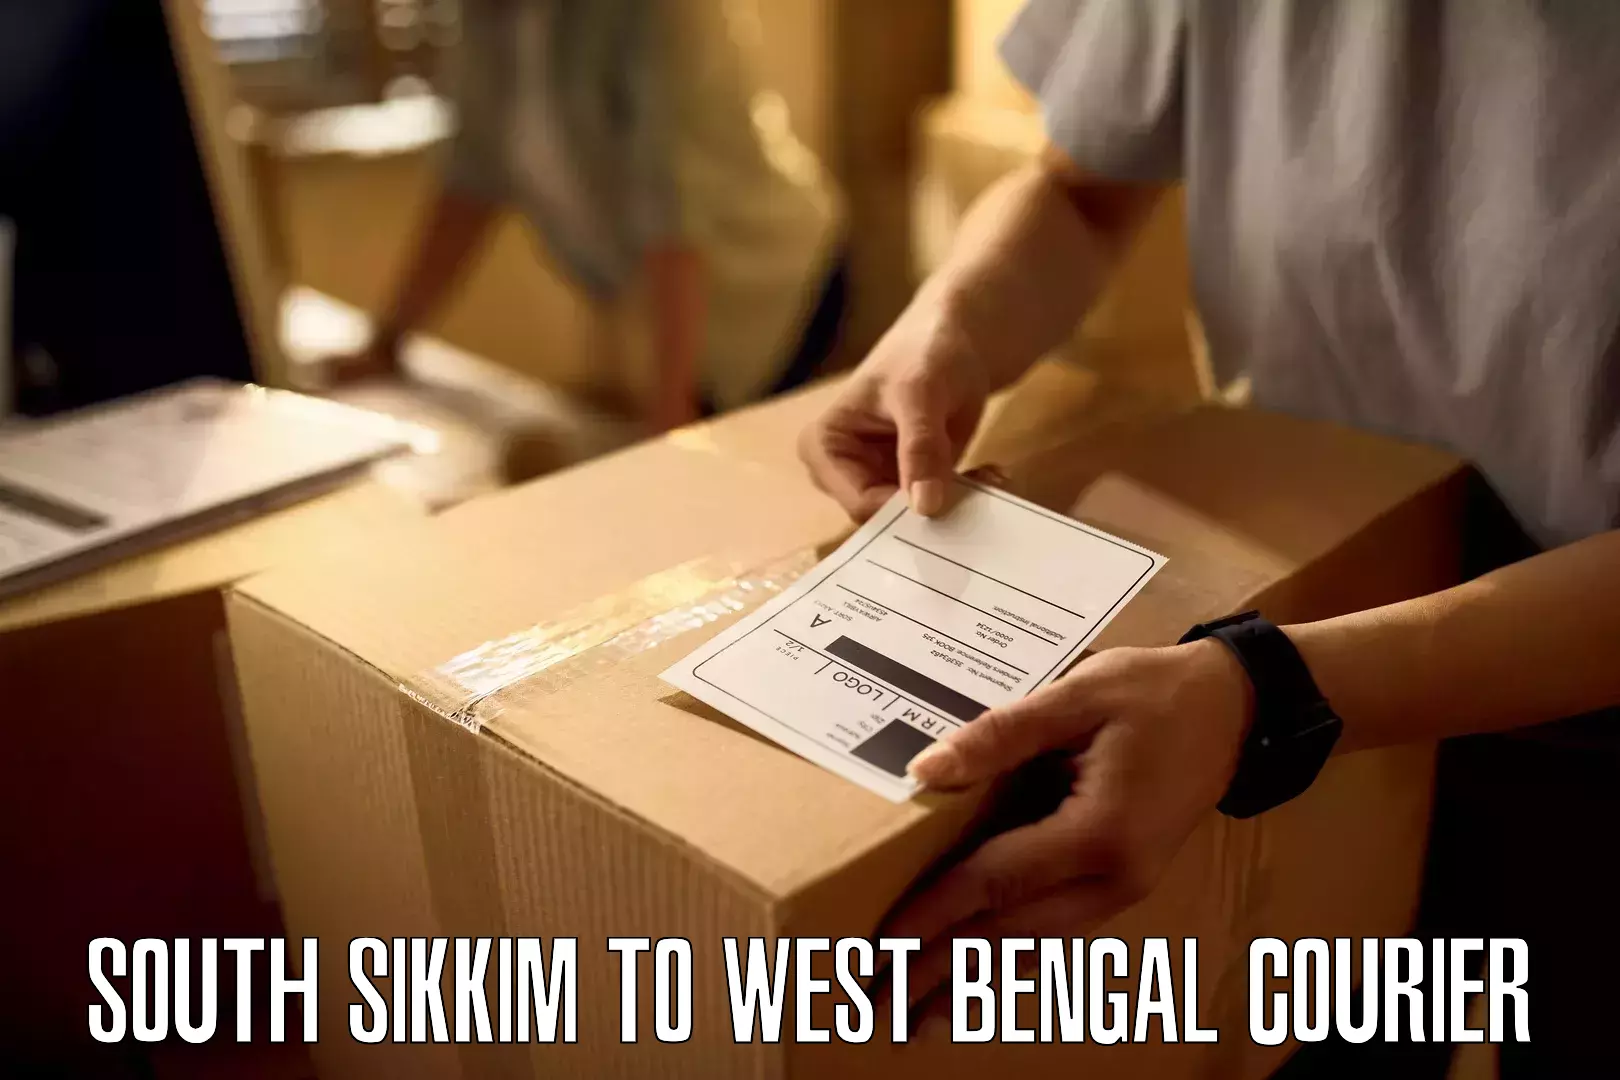 State-of-the-art courier technology South Sikkim to Gangarampur